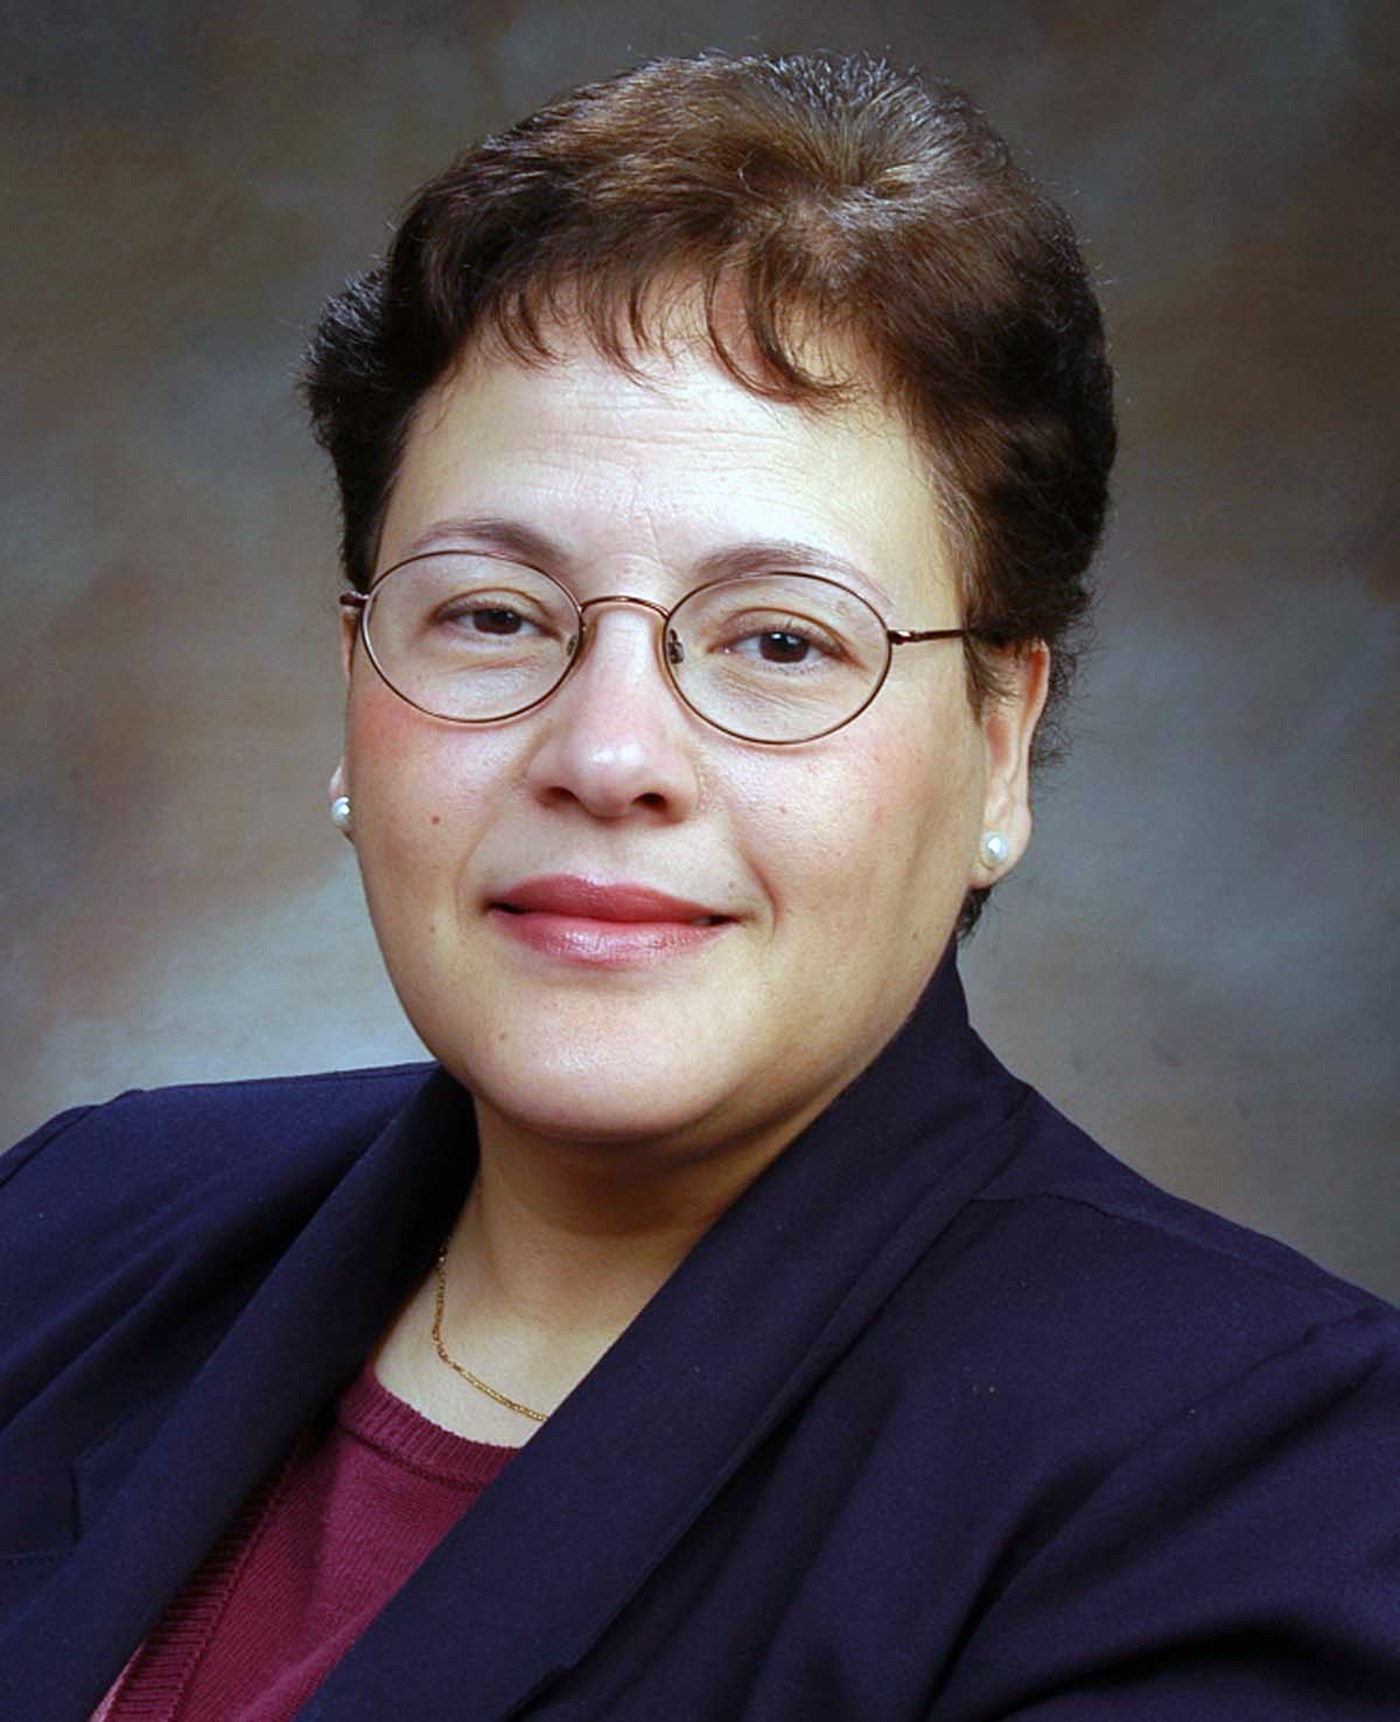 Dalila Megherbi is an Associate Professor in the Francis College of Engineering's Electrical & Computer Engineering and the Director of CMINDS at UMass Lowell.